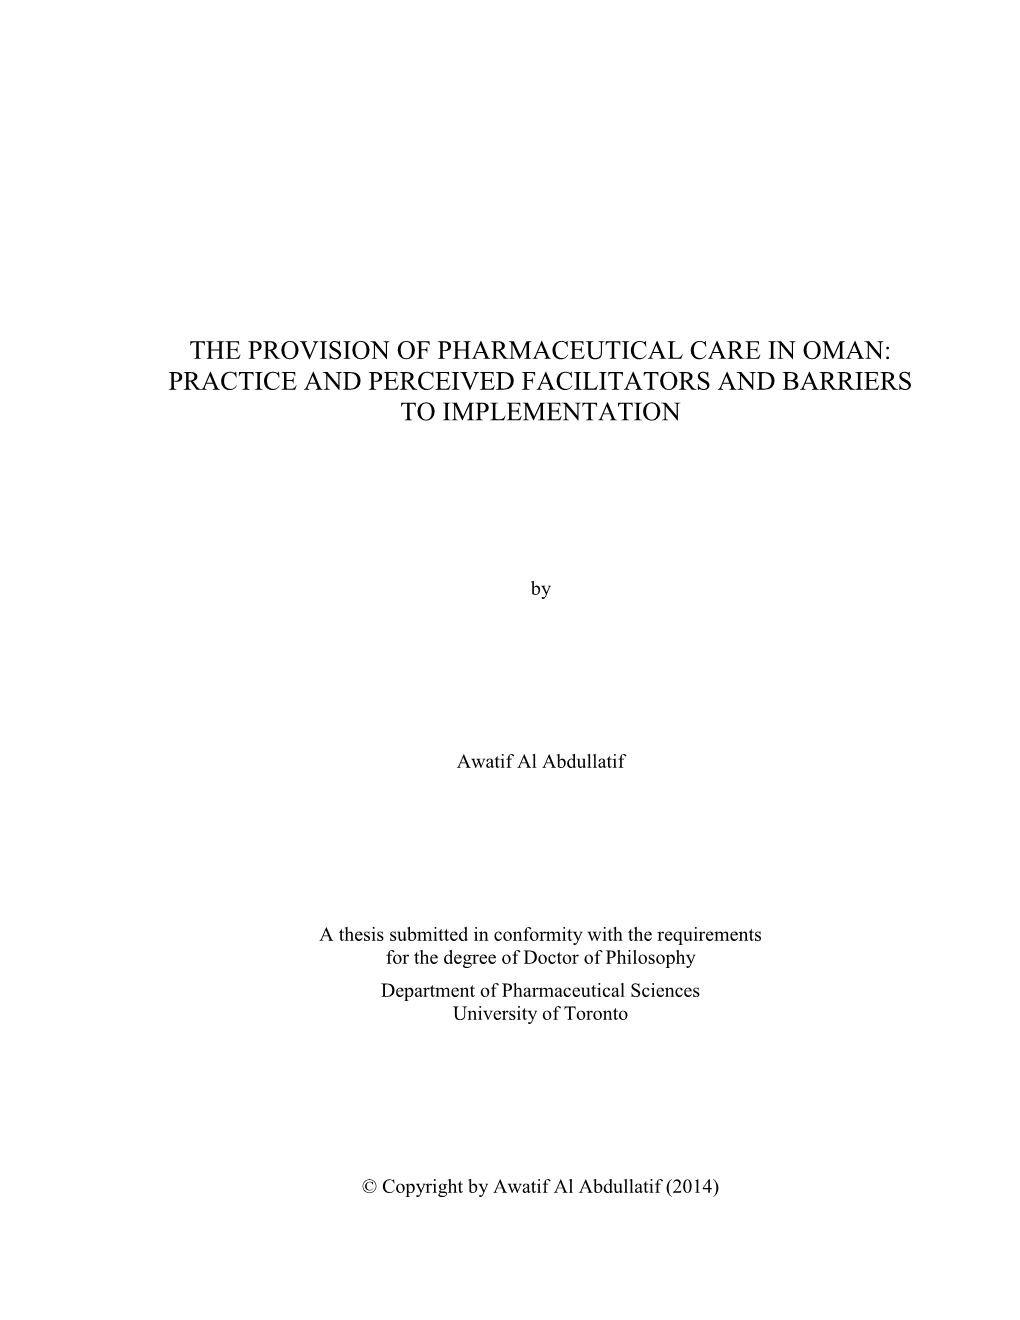 The Provision of Pharmaceutical Care in Oman: Practice and Perceived Facilitators and Barriers to Implementation